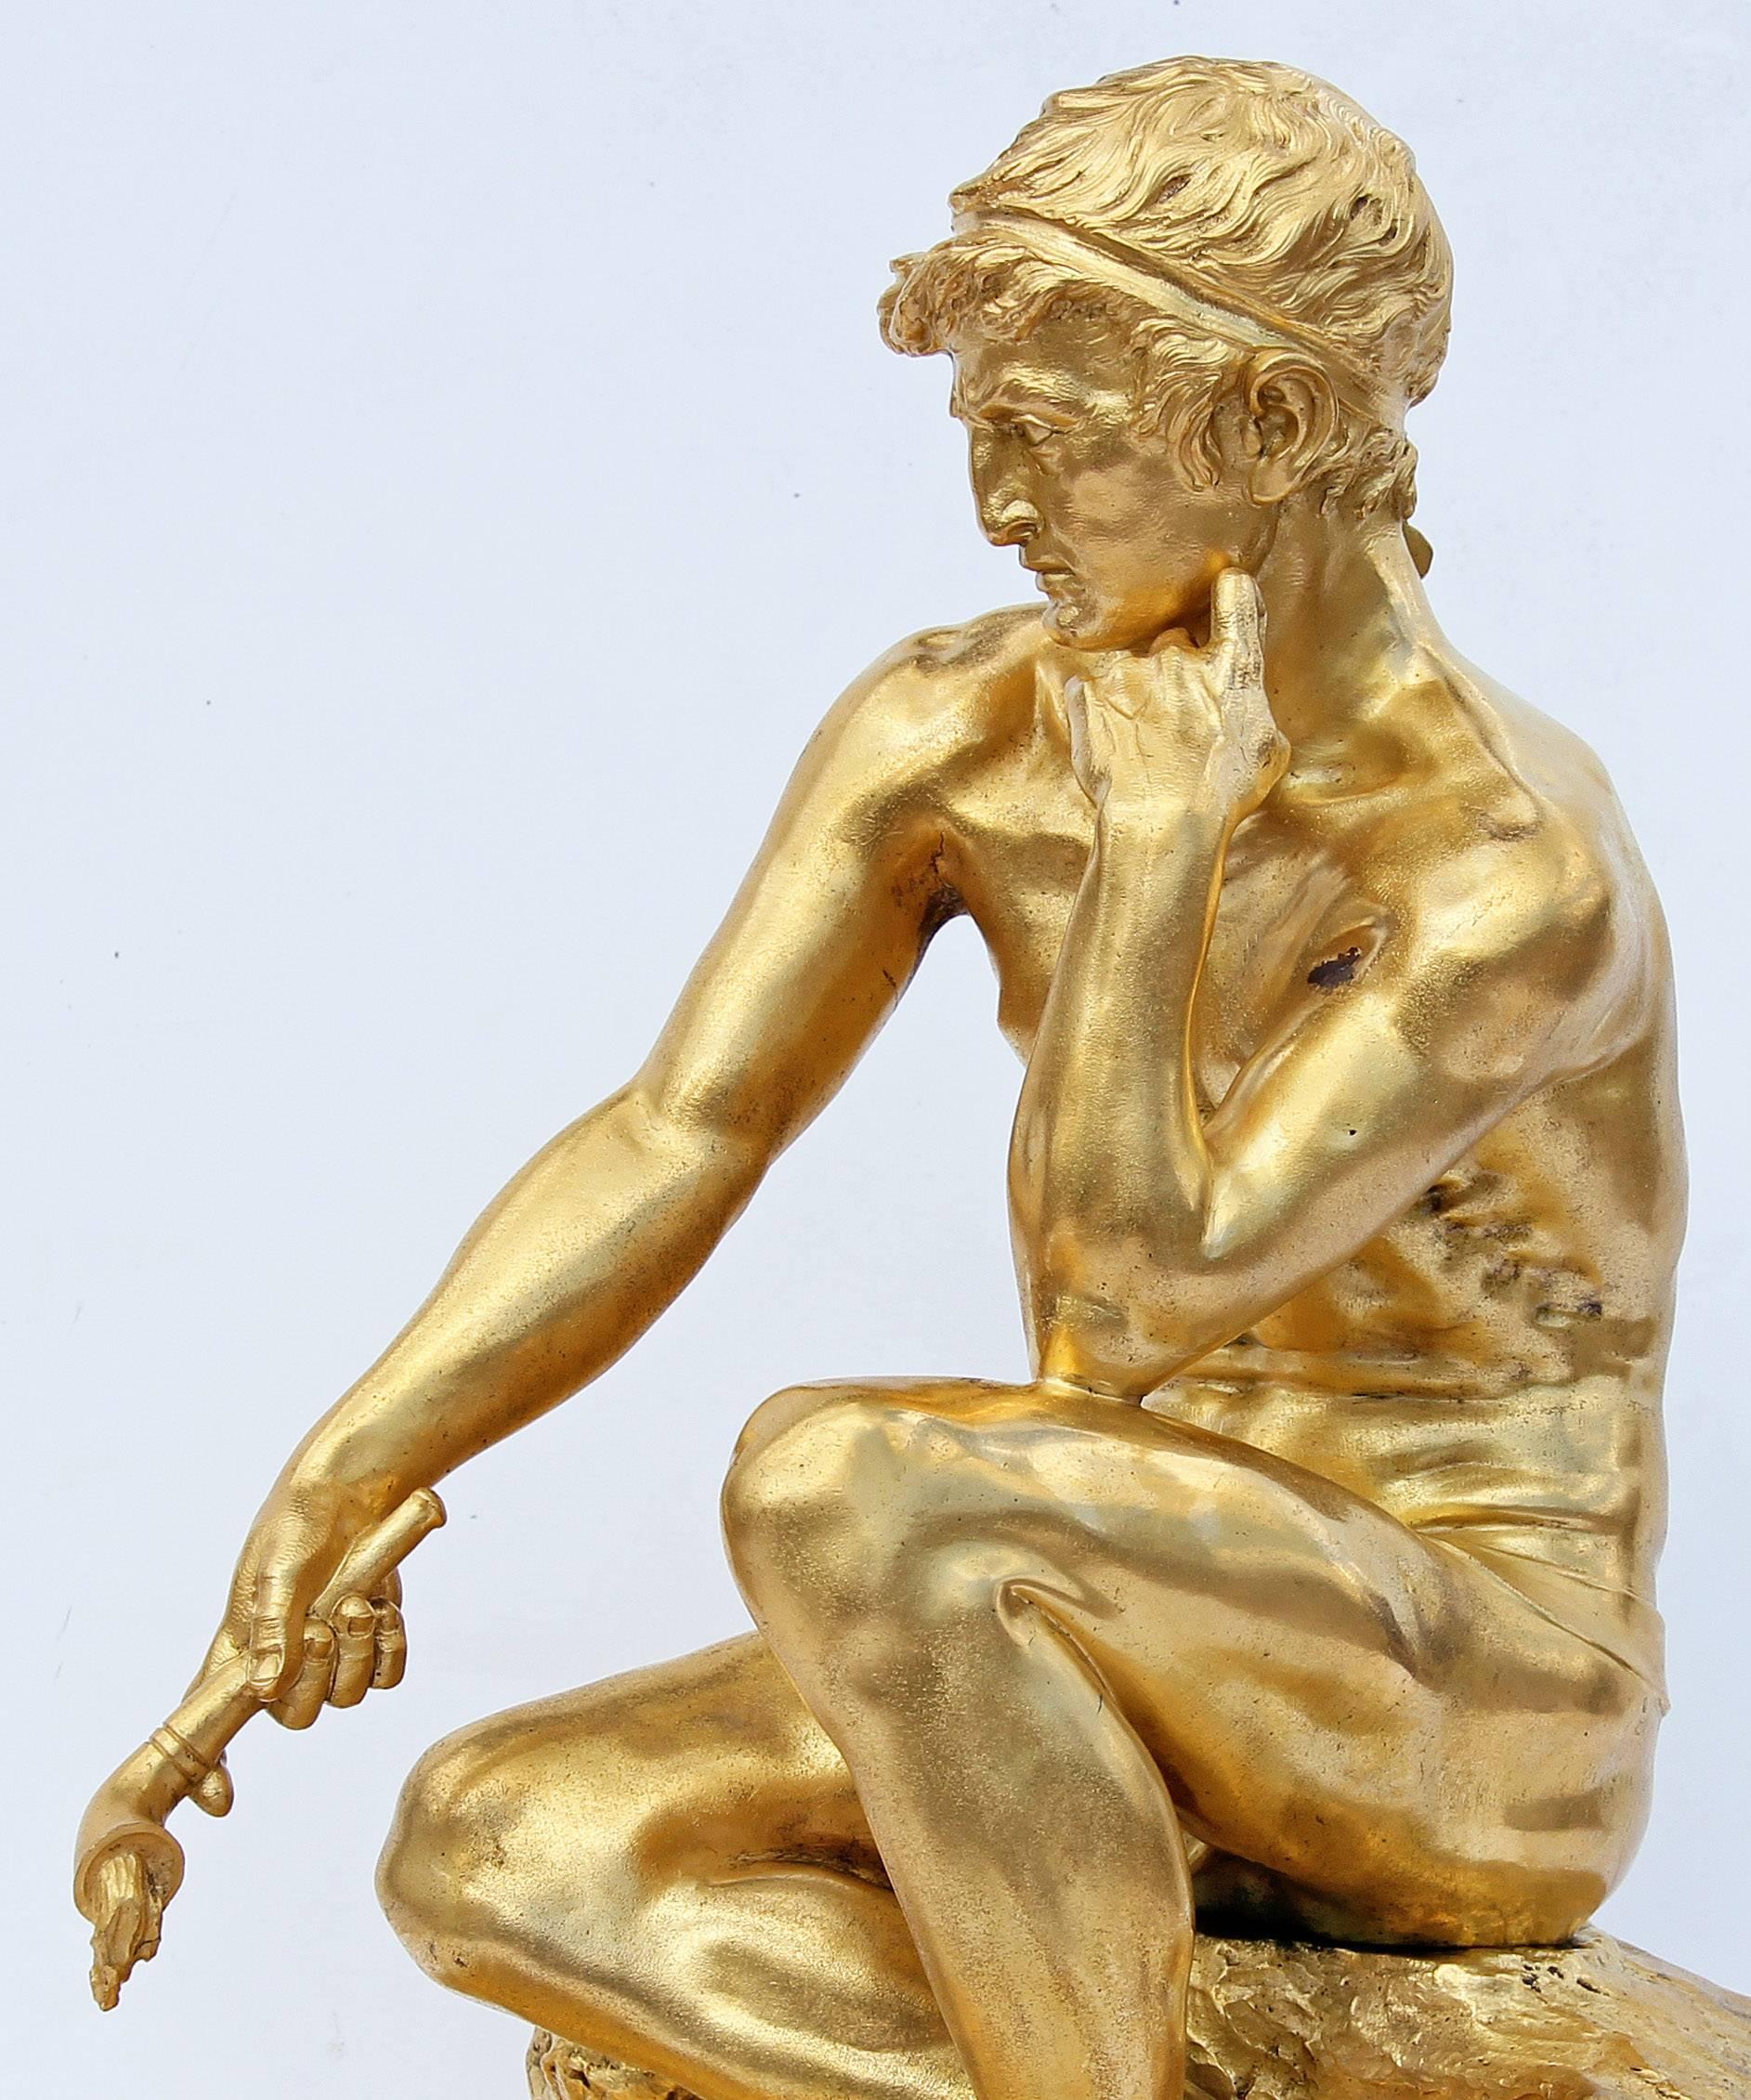 French neoclassical revival classical male nude bronze sculpture. Exceptional detail original fire gilding. Cast by E.F. Caldwell. It is likely this was a cigar lighter originally and had a live flame, circa 1900. This is a very rare piece of